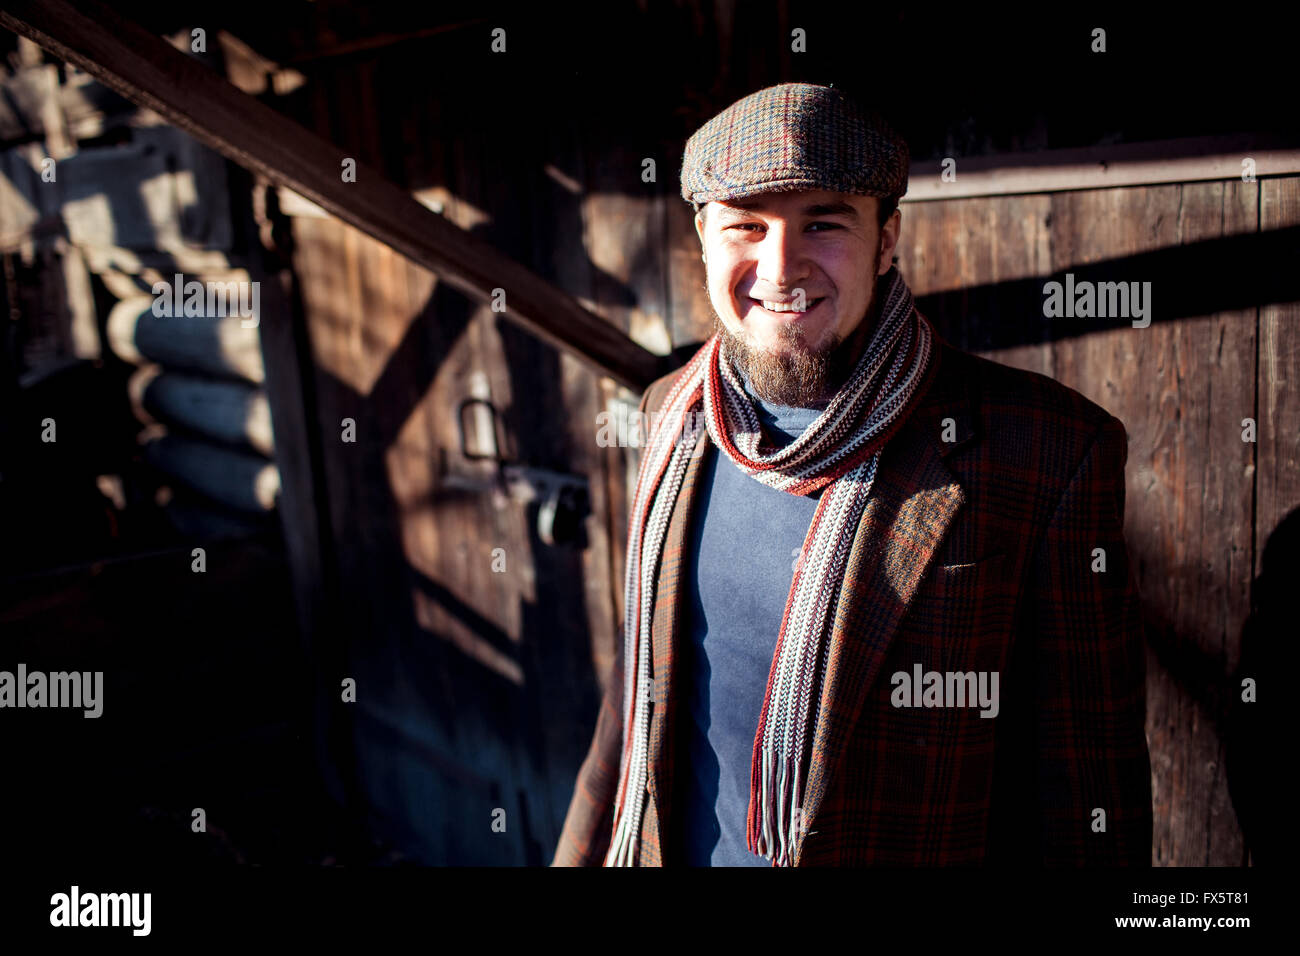 Man in flat cap with old-fashioned outfit outdoors on  background of wooden constructions. Stock Photo